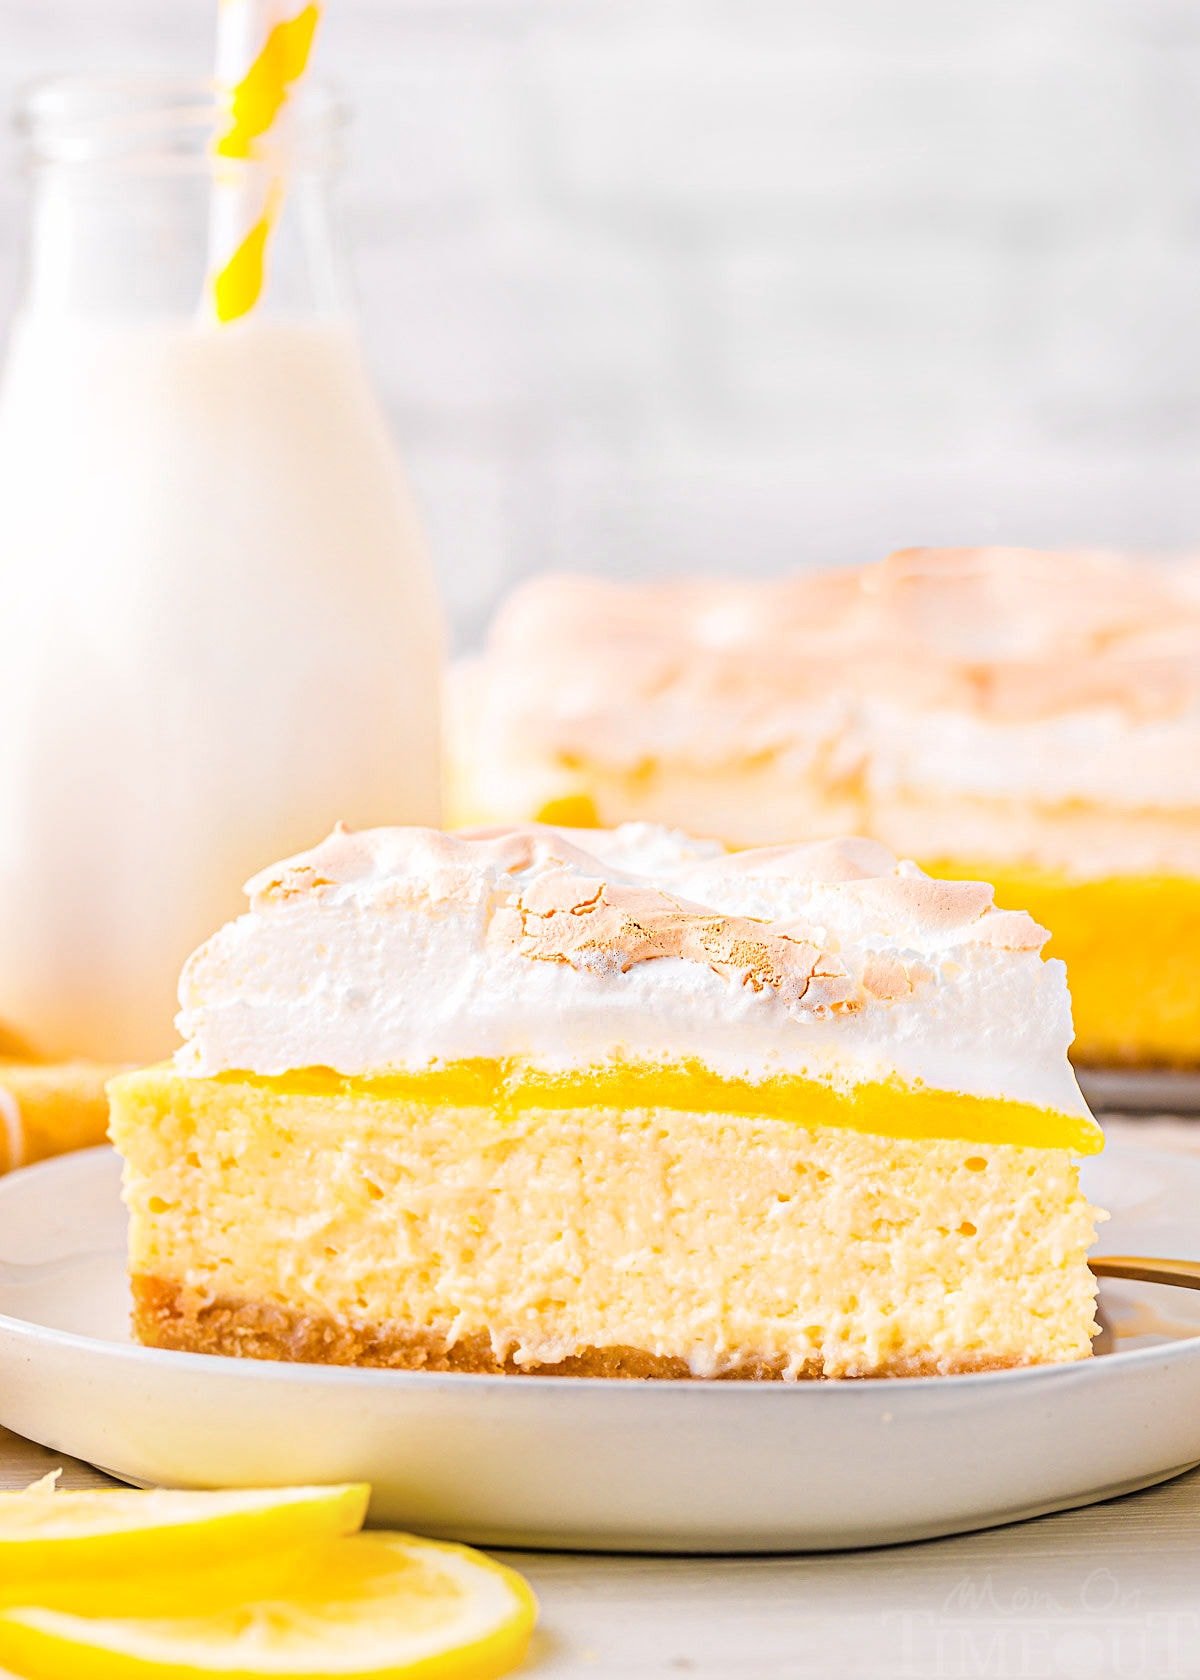 one slice of lemon meringue cheesecake sitting on a white plate with the rest of the cheesecake seen in the background next to a small bottle of milk. lemon slices near the front of the plate.